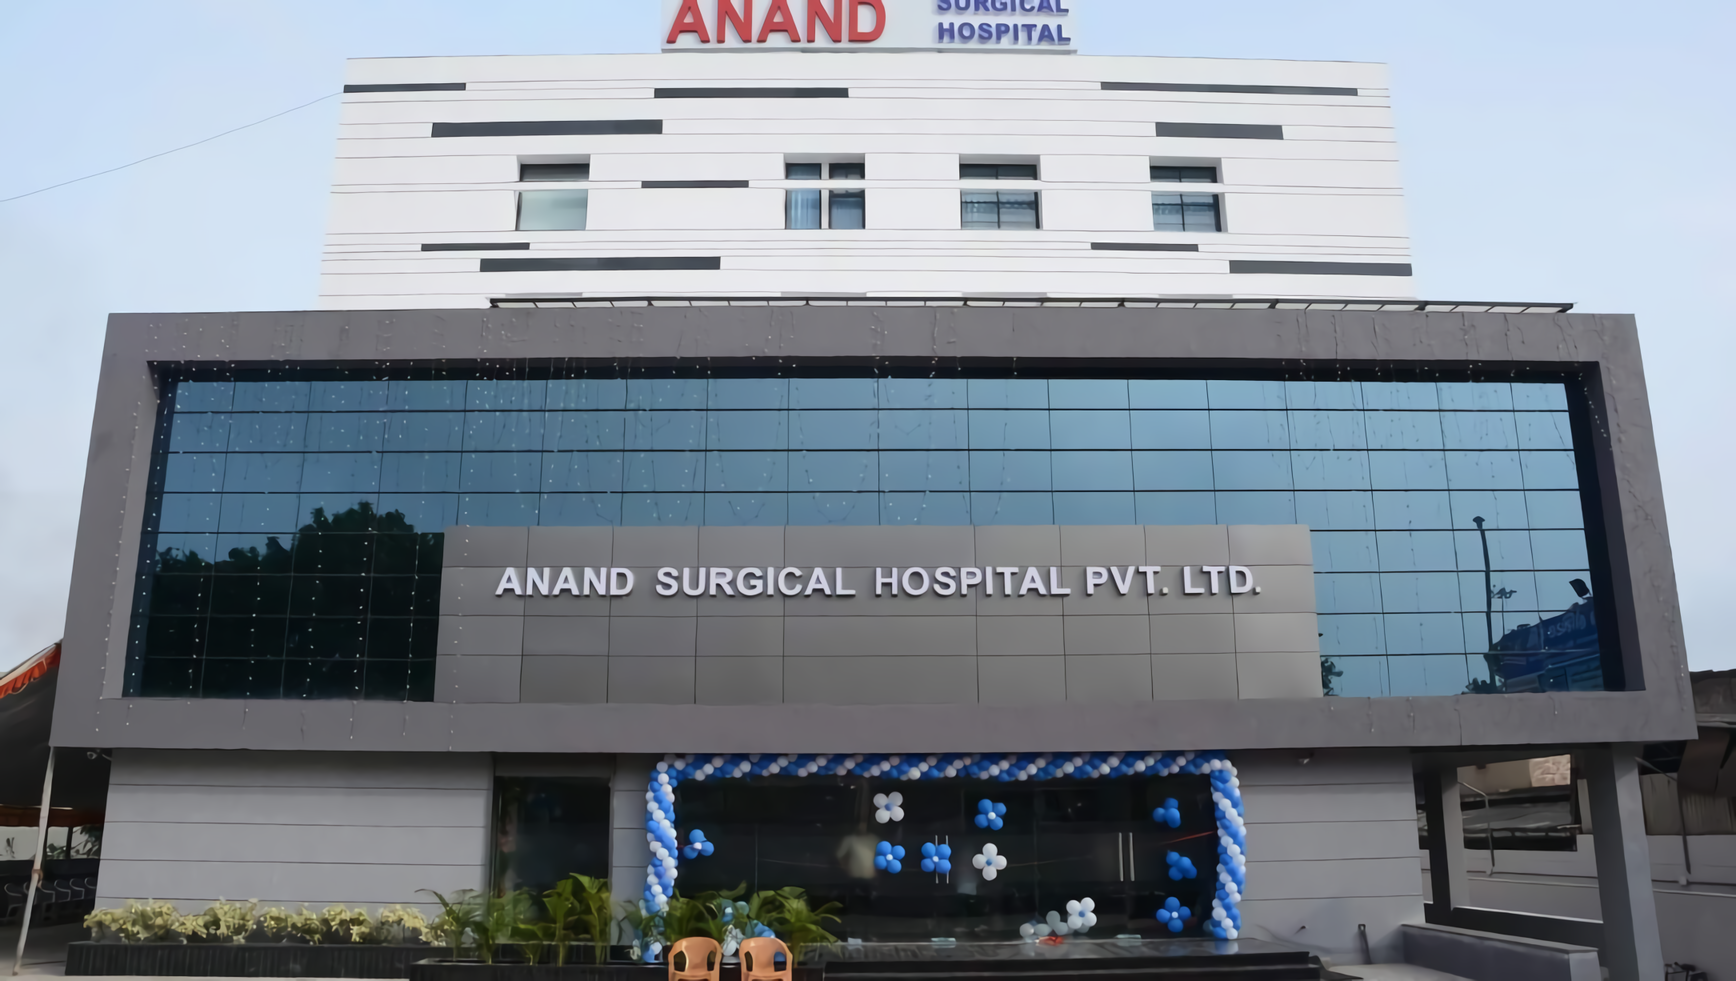 Anand Surgical Hospital